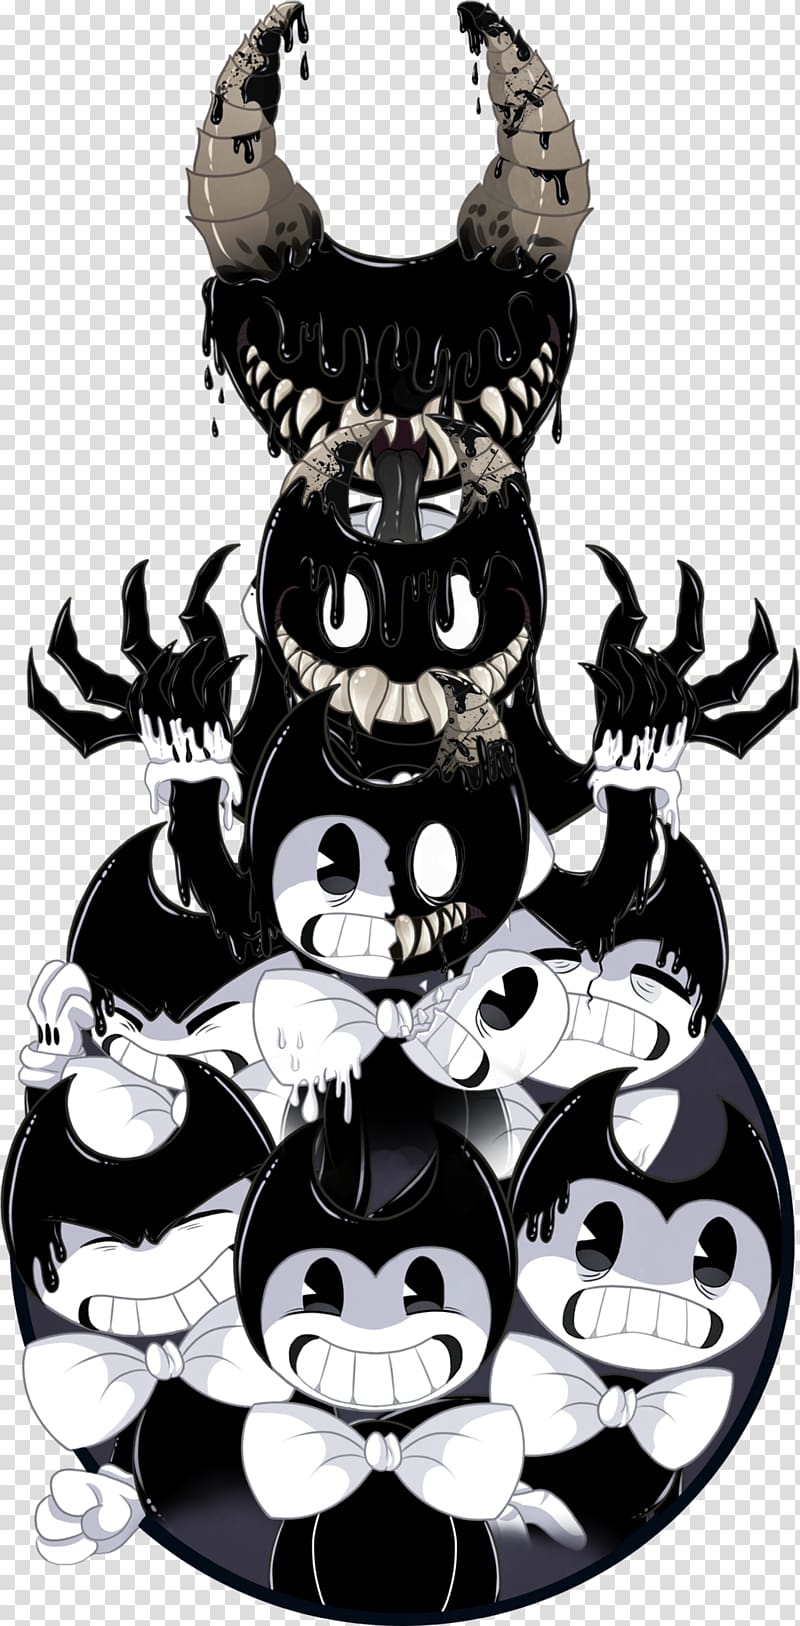 Bendy and the Ink Machine Internet meme Video game YouTube, do not forget me transparent background PNG clipart